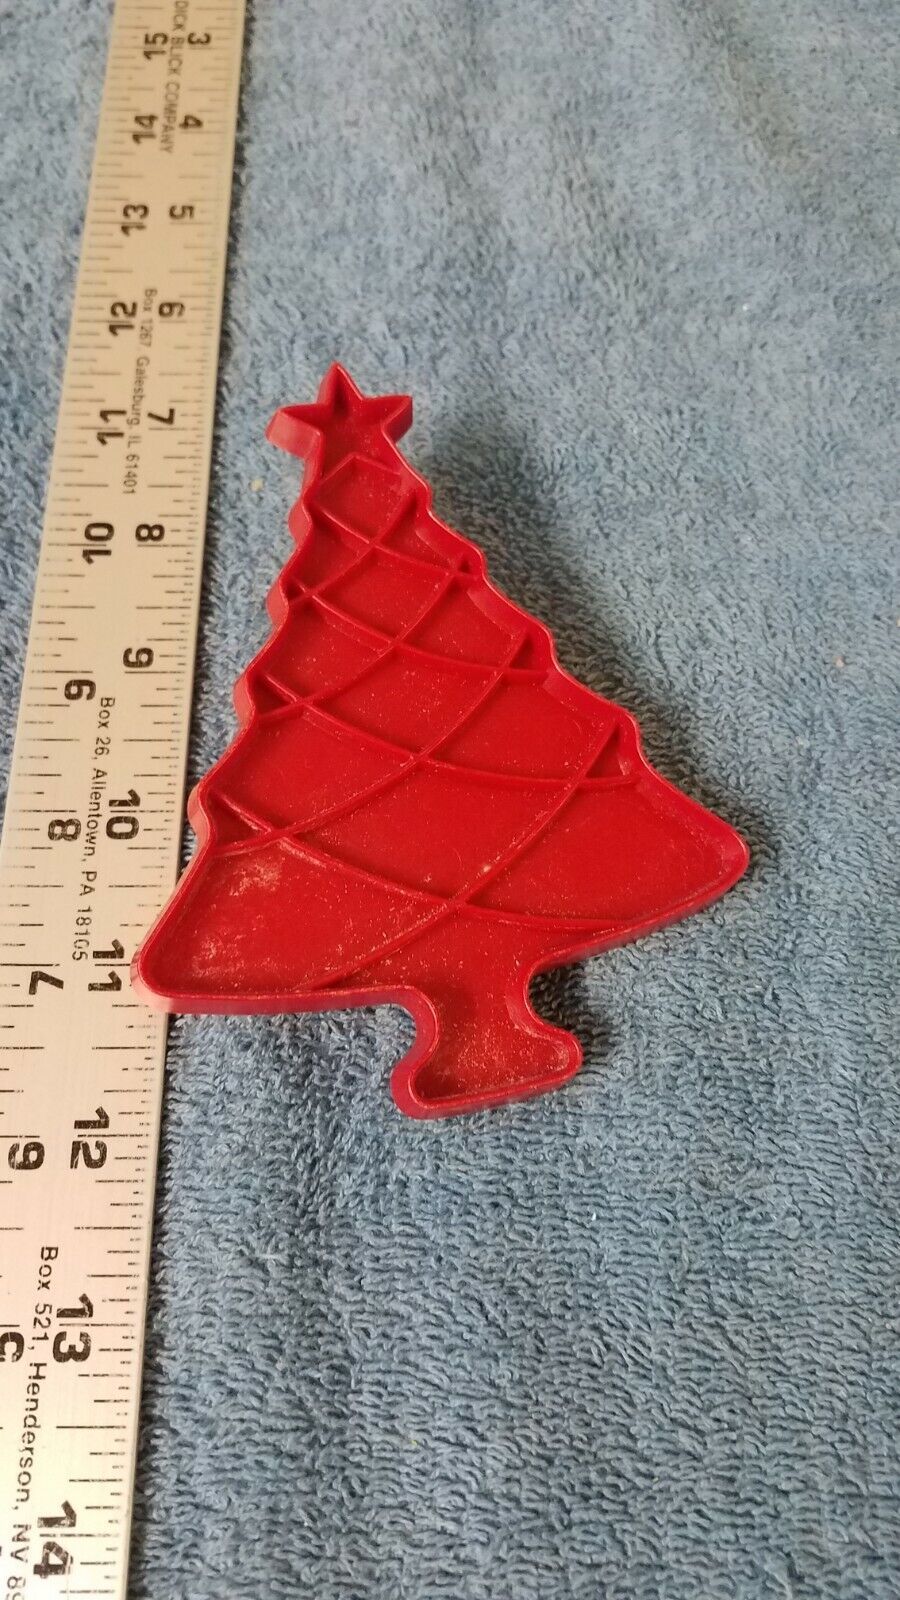 Three Vintage Tupperware Cookie Cutters in Different Holiday